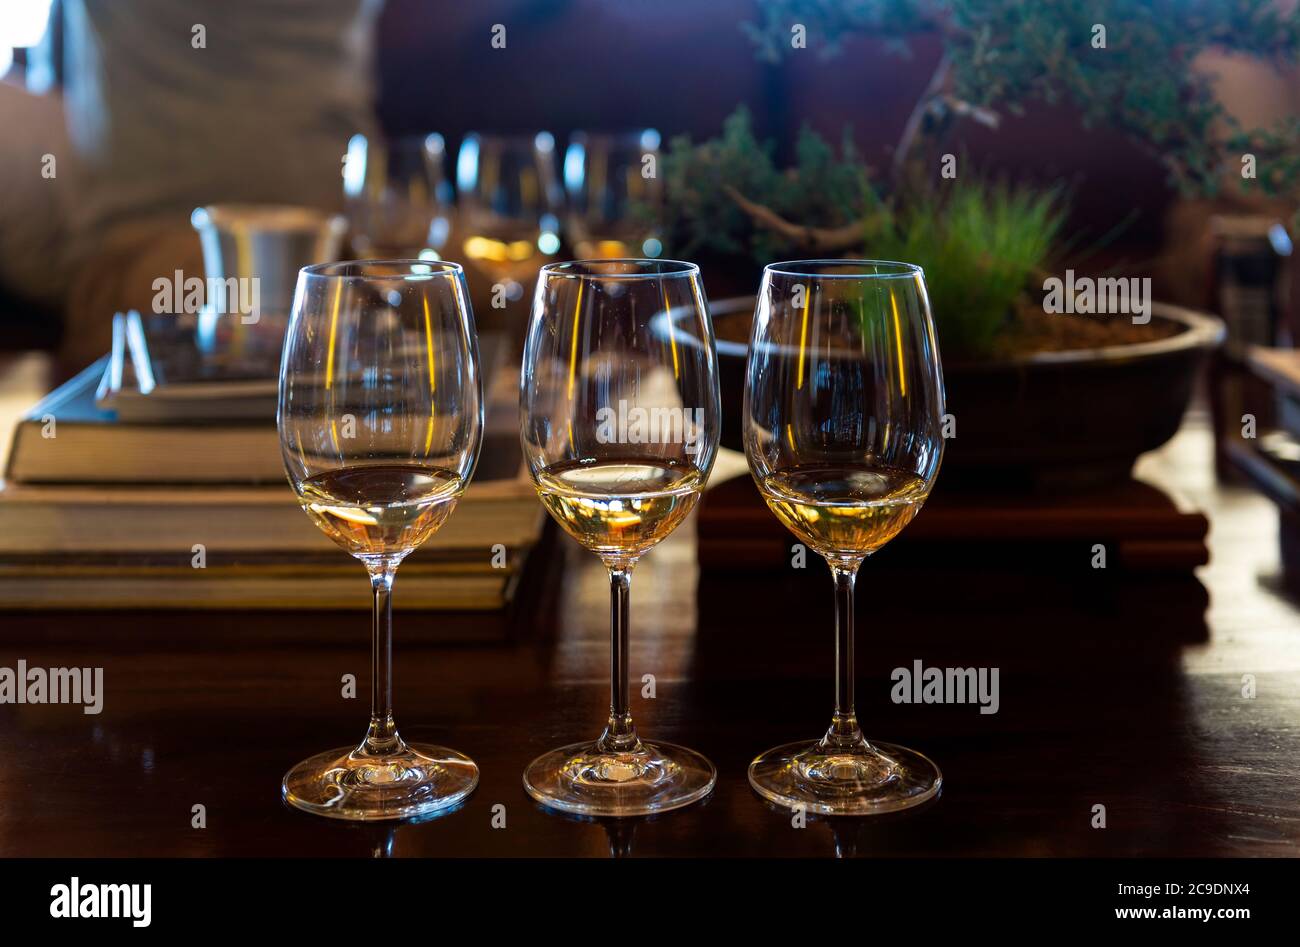 Set up of three glasses of white wine (Sauvignon Blanc and Chardonnay) for a wine tasting, South Africa. Stock Photo